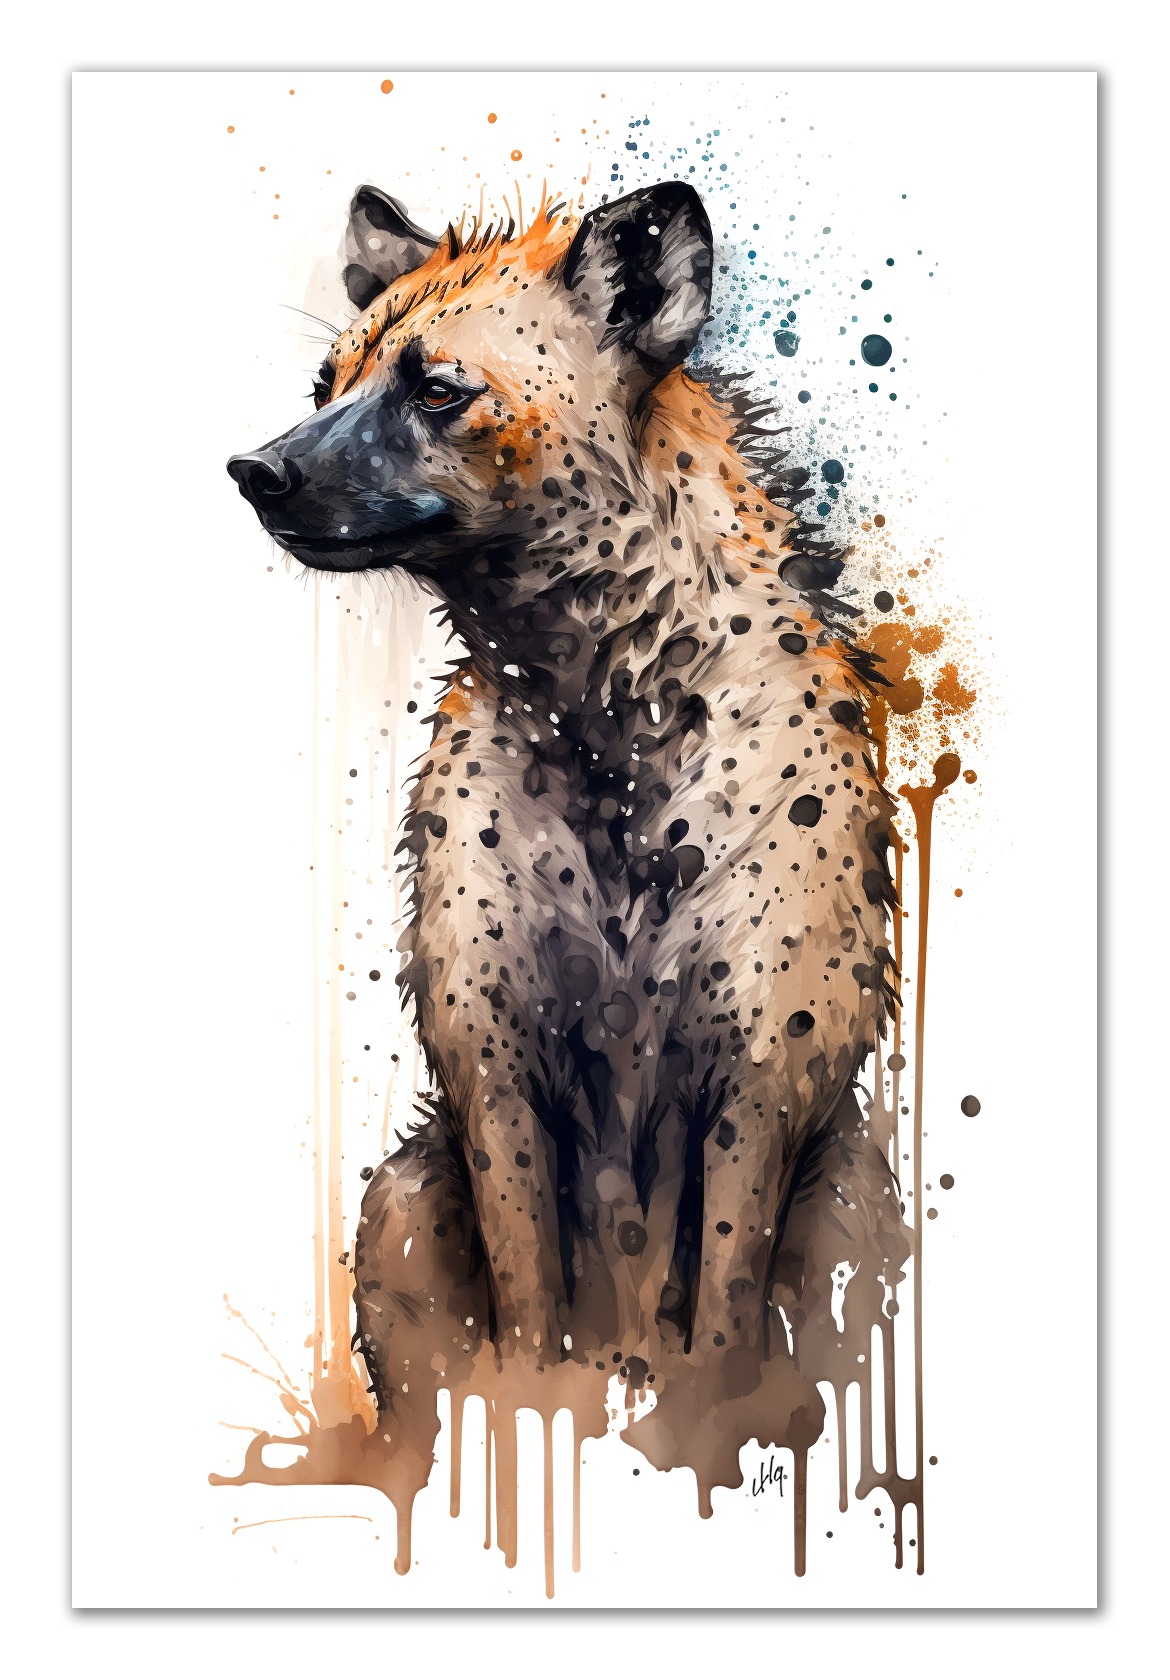 Hyena Wall Art from the Wildlife Collection, a striking representation on canvas, illustrating the raw intensity and natural allure of this often-misunderstood creature. Perfect for those seeking impactful wall art, nature-themed gallery inclusions, dynamic canvas showpieces, and a touch of the wild for contemporary home decor.